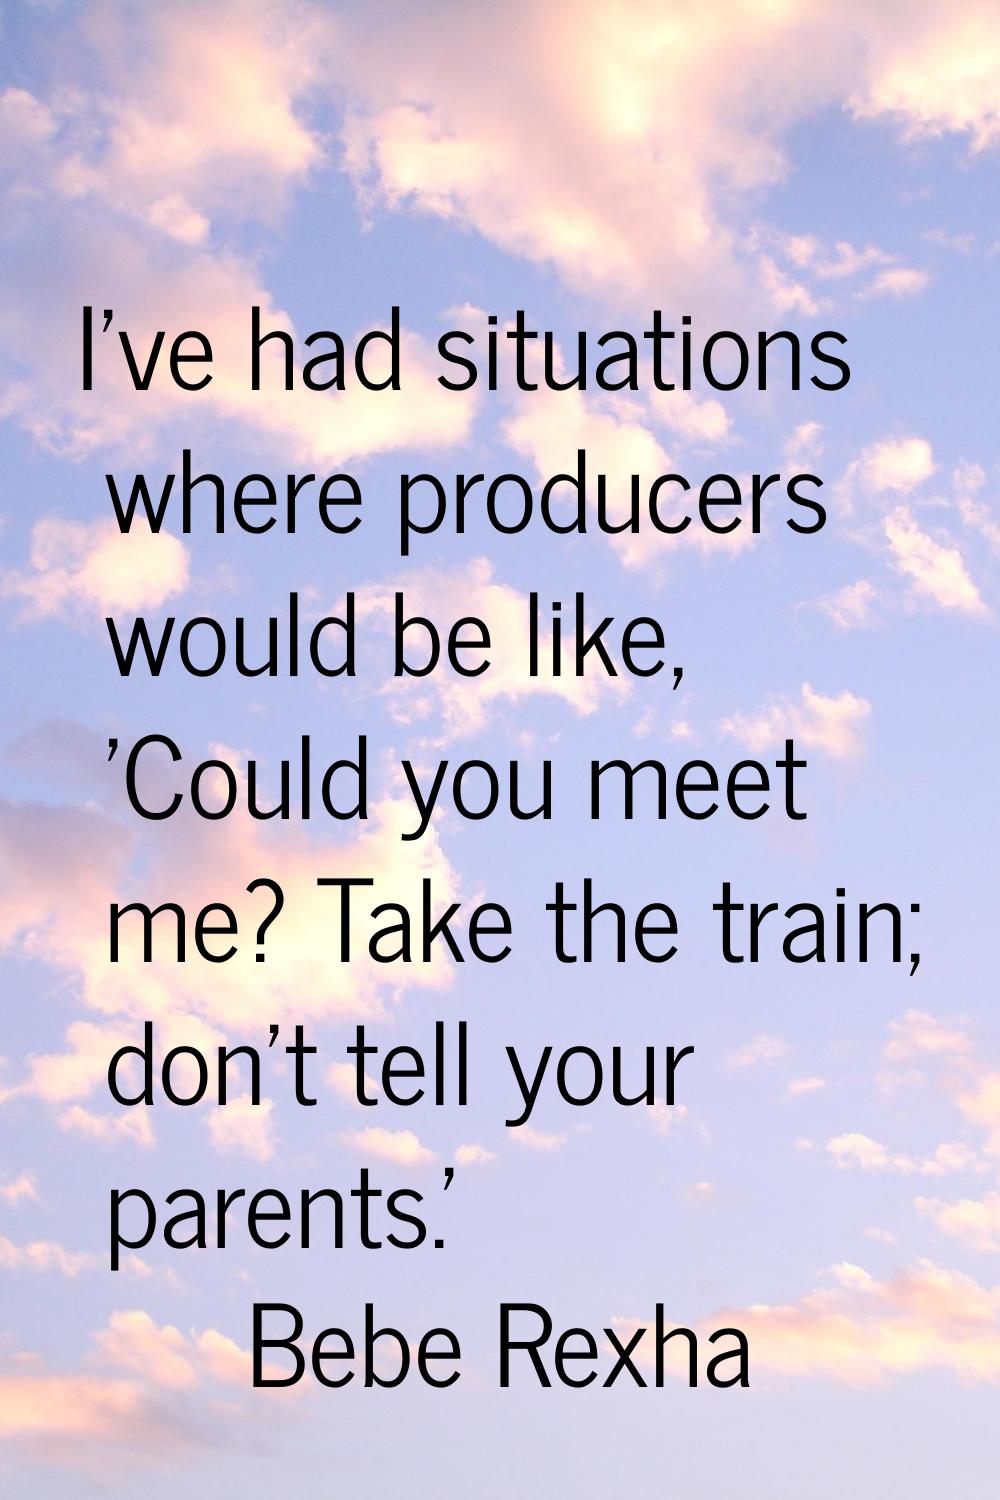 I've had situations where producers would be like, 'Could you meet me? Take the train; don't tell y